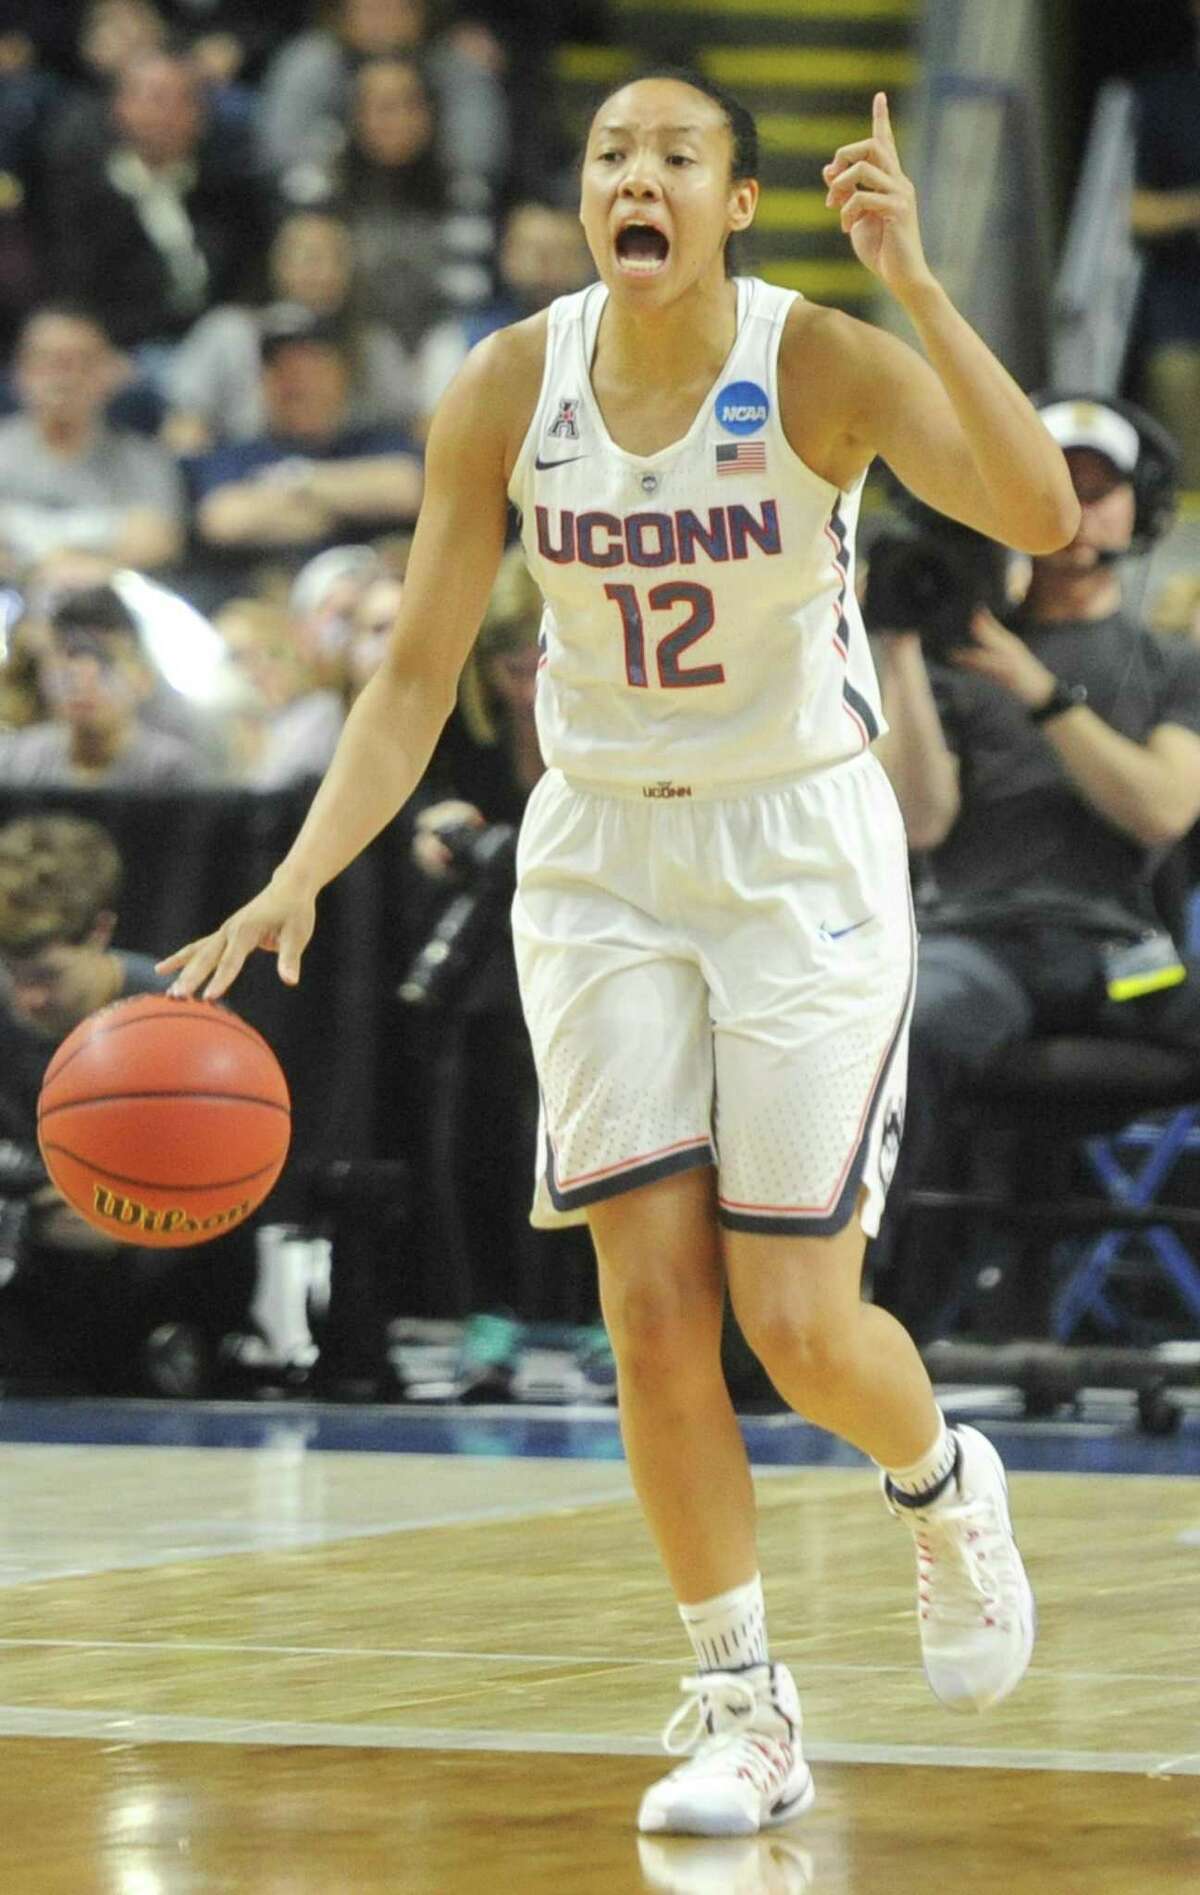 UConn's Saniya Chong takes the ball up court in No. 1 UConn's 86-71 win over No. 4 UCLA in the 2017 NCAA Division I Women's Basketball Championship Regional Semifinal game at Webster Bank Arena in Bridgeport, Conn. Saturday, March 25, 2017.